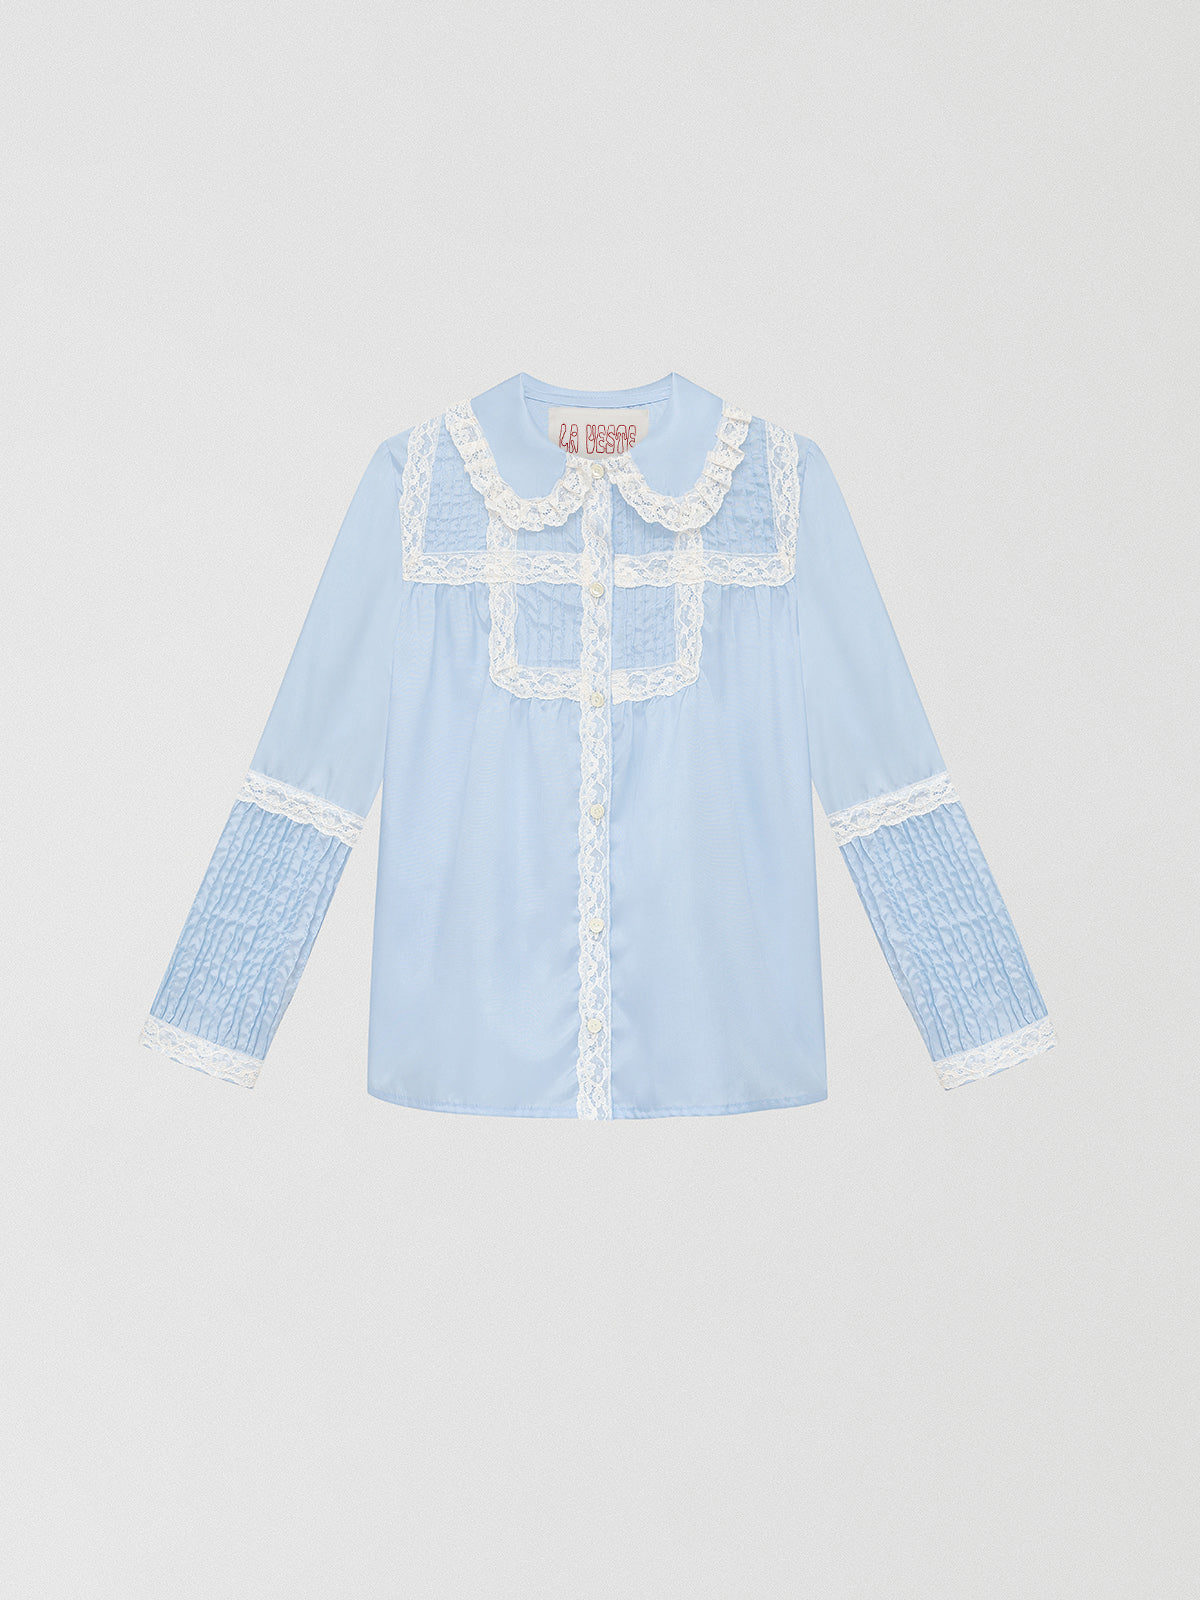 Light blue shirt with geometric lace pattern and pleated details